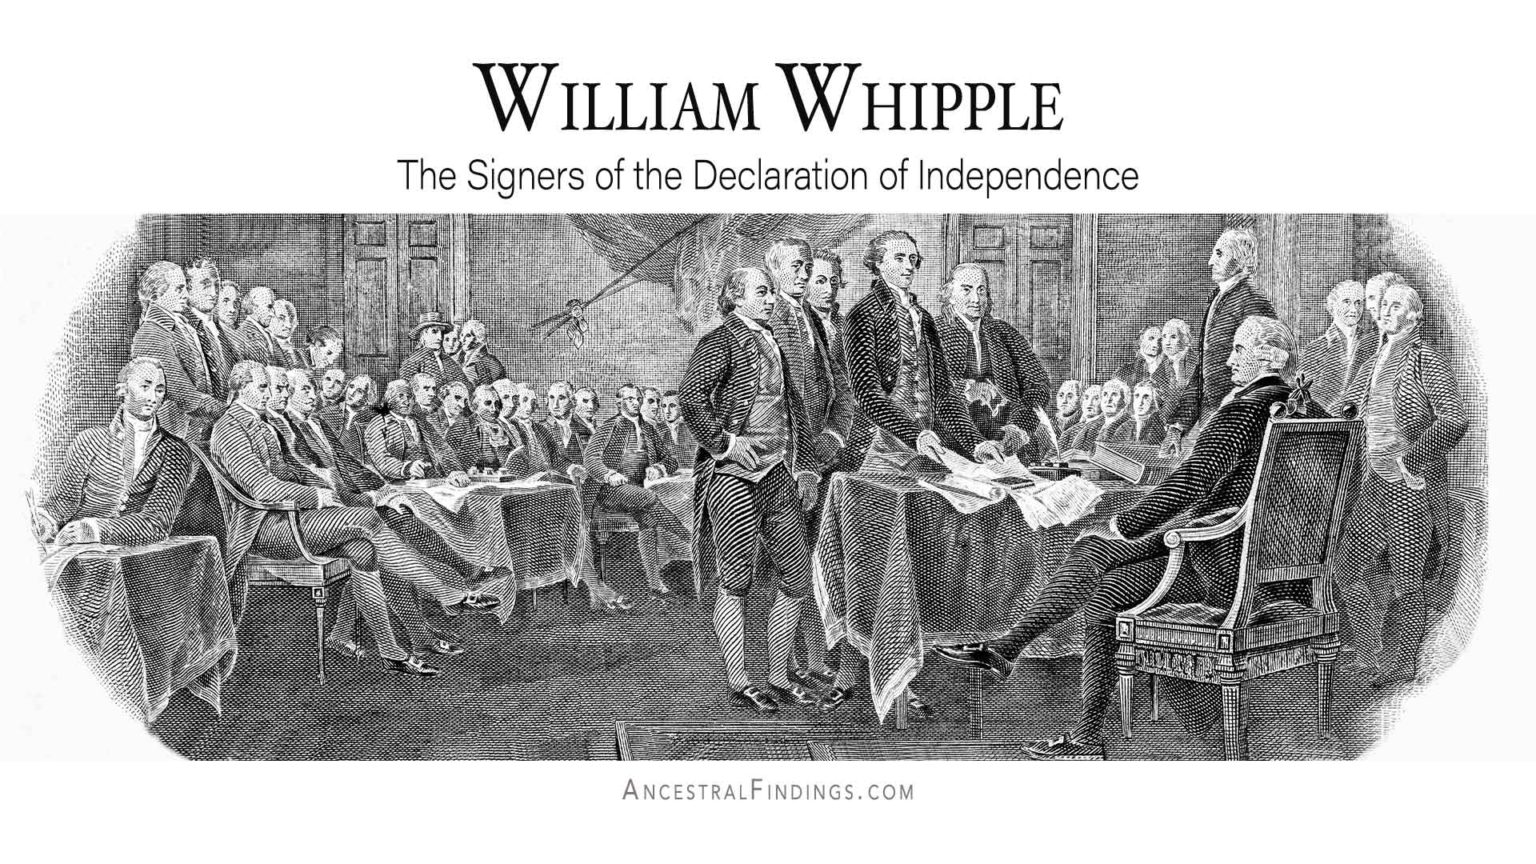 William Whipple: The Signers of the Declaration of Independence